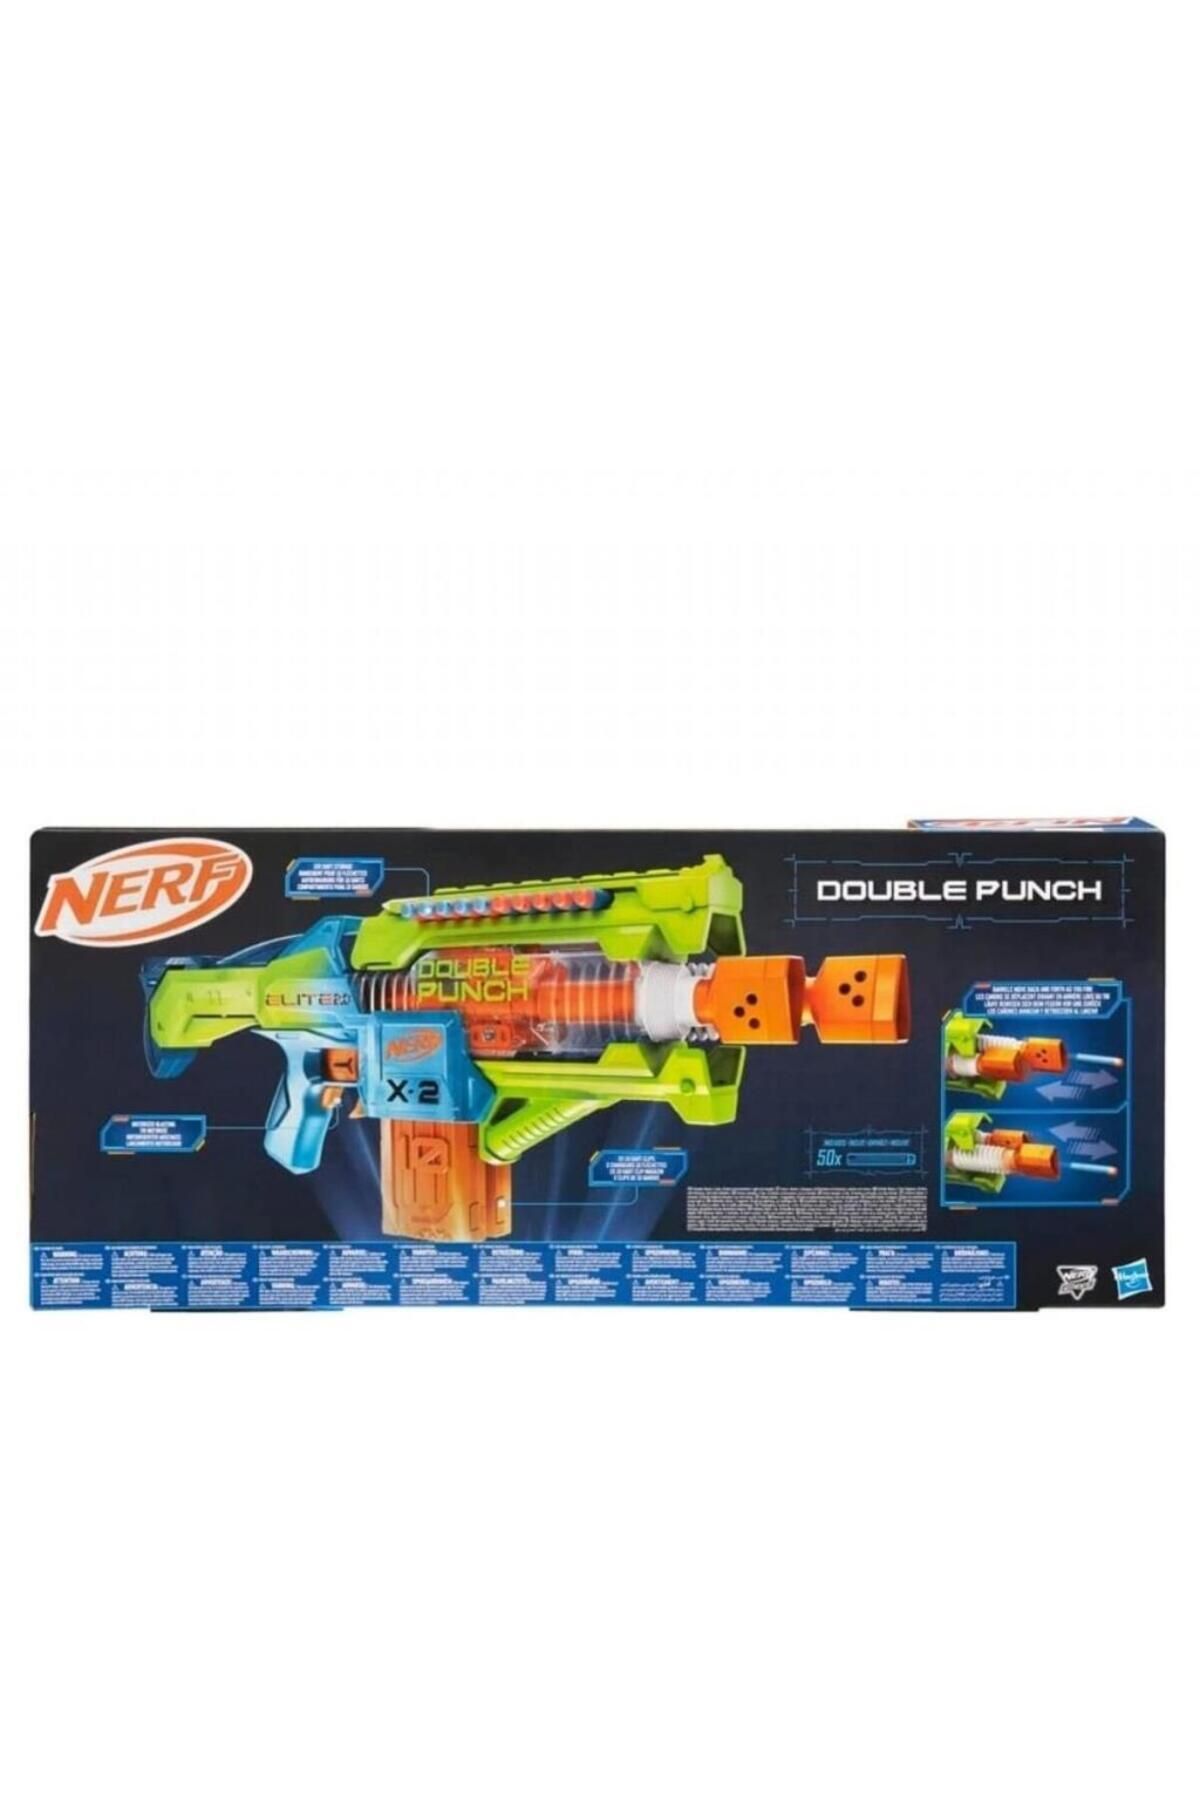 NERF ELİTE 2.0 DOUBLE PUCH